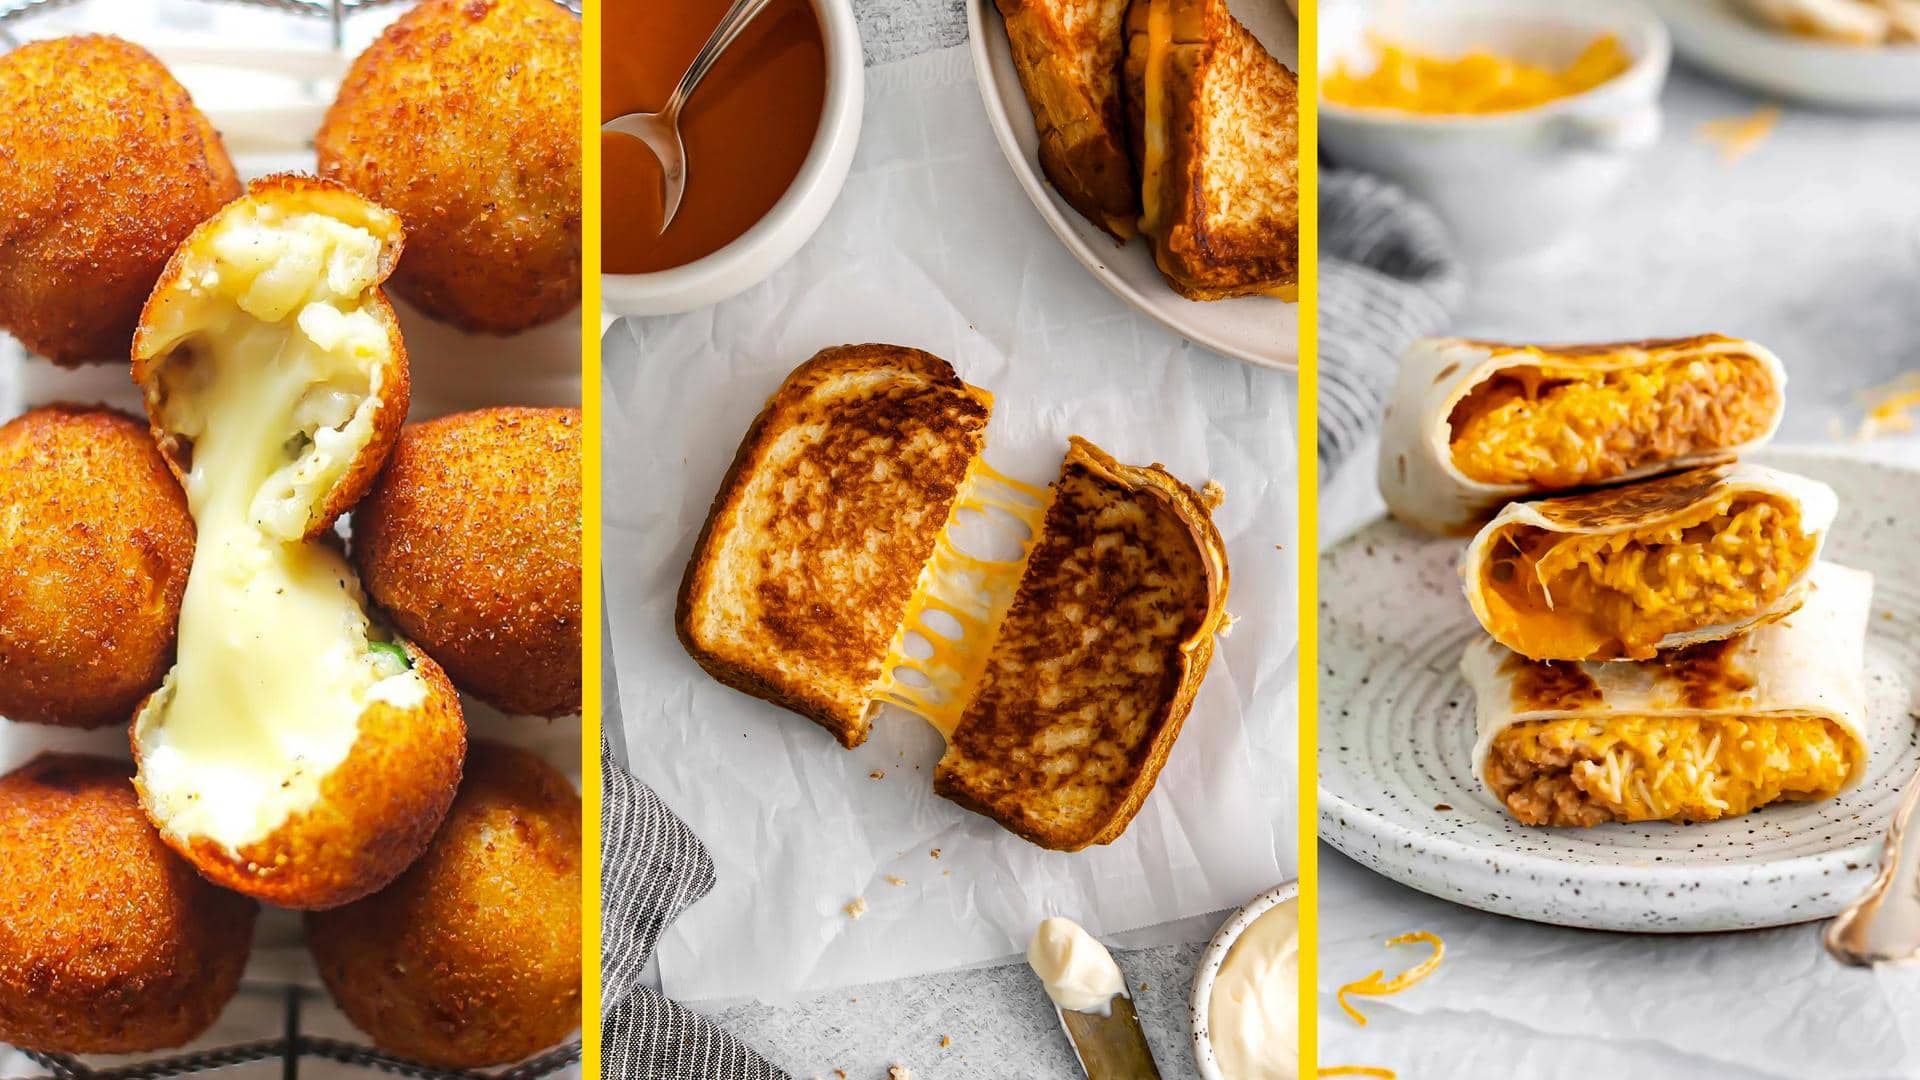 Cheddar recipes that you must try for a cheesy day